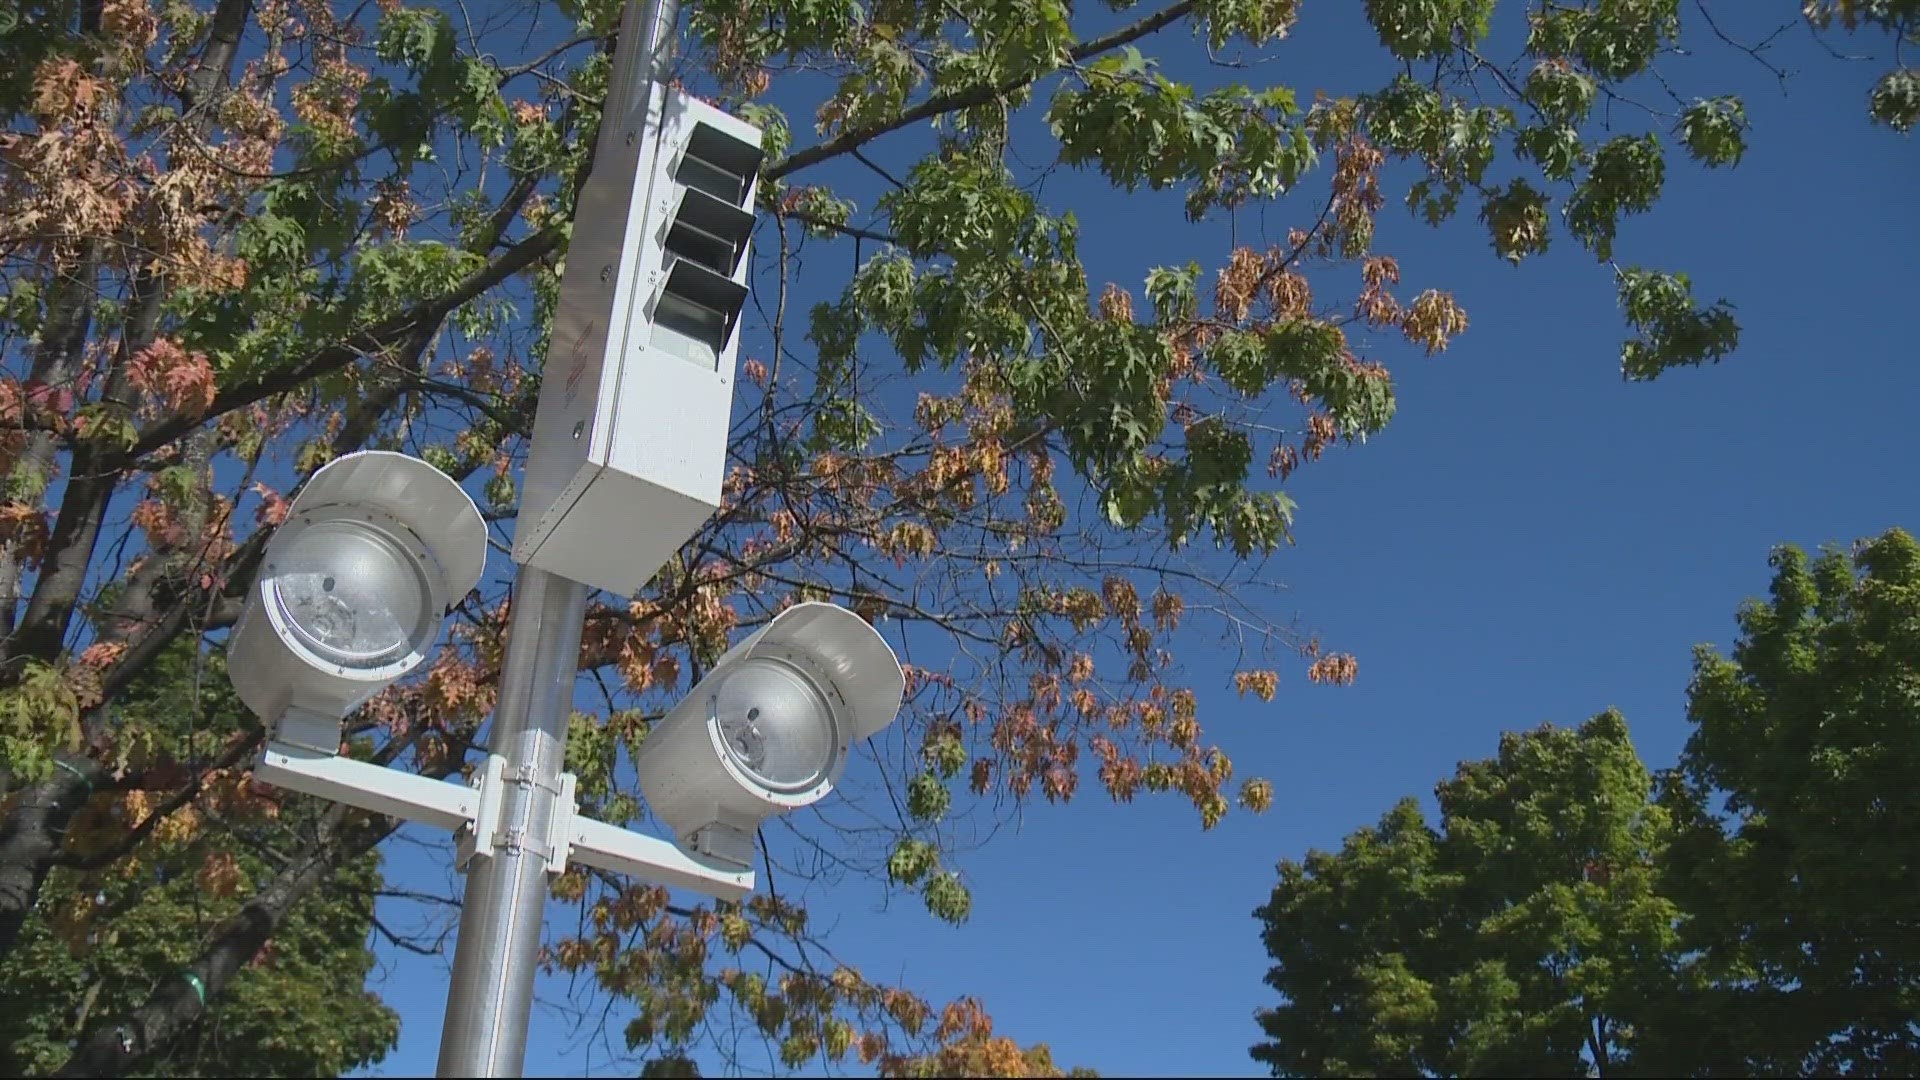 The Portland Bureau of Transportation will install eight more cameras by the end of the year and another dozen next year.